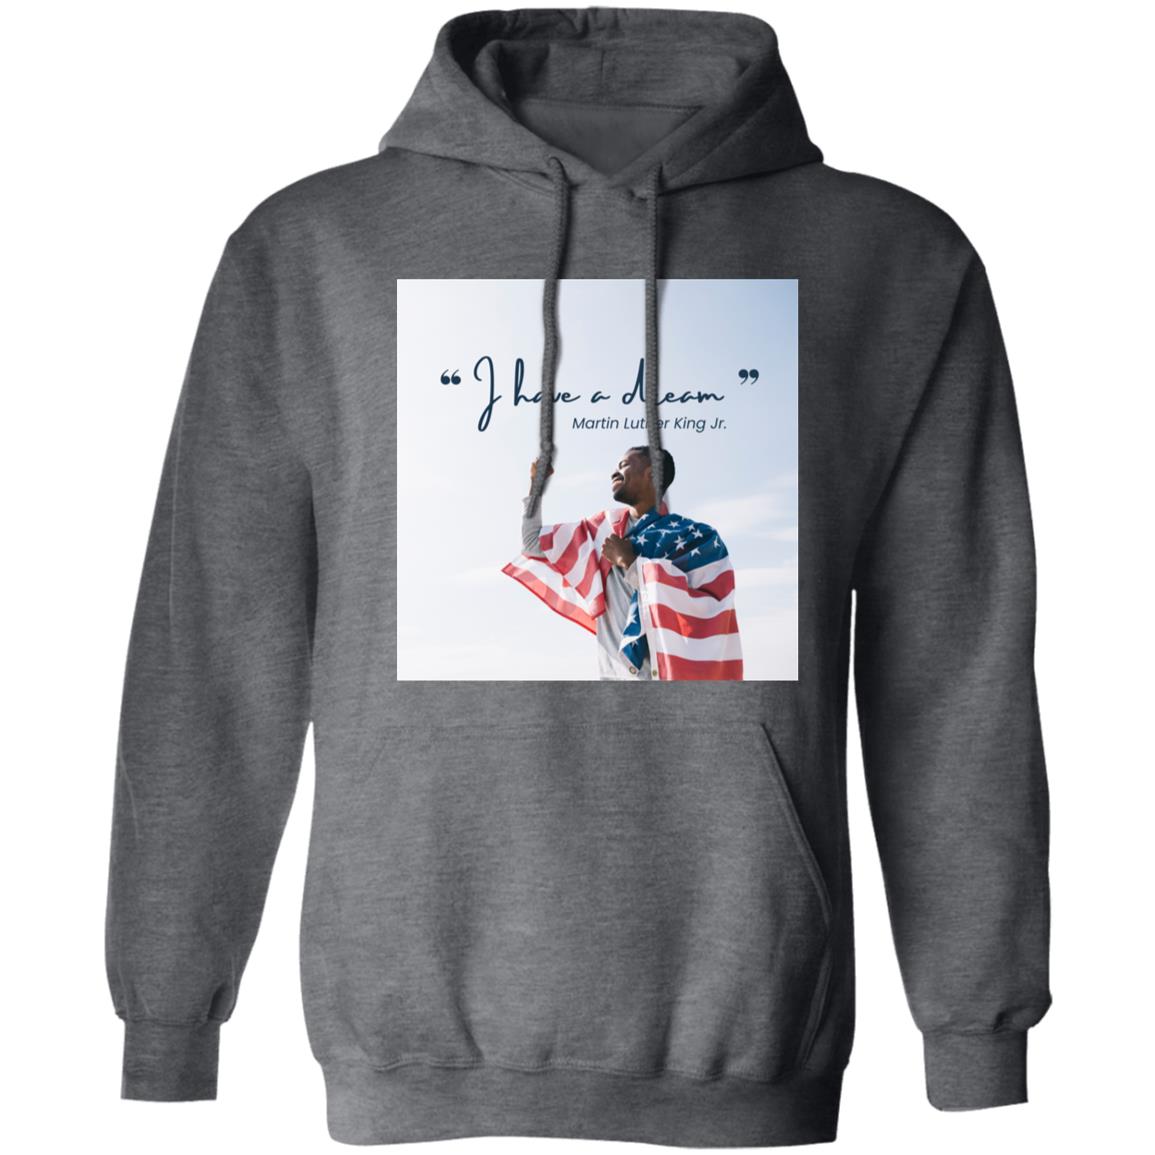 I HAVE A DREAM   Hoodie